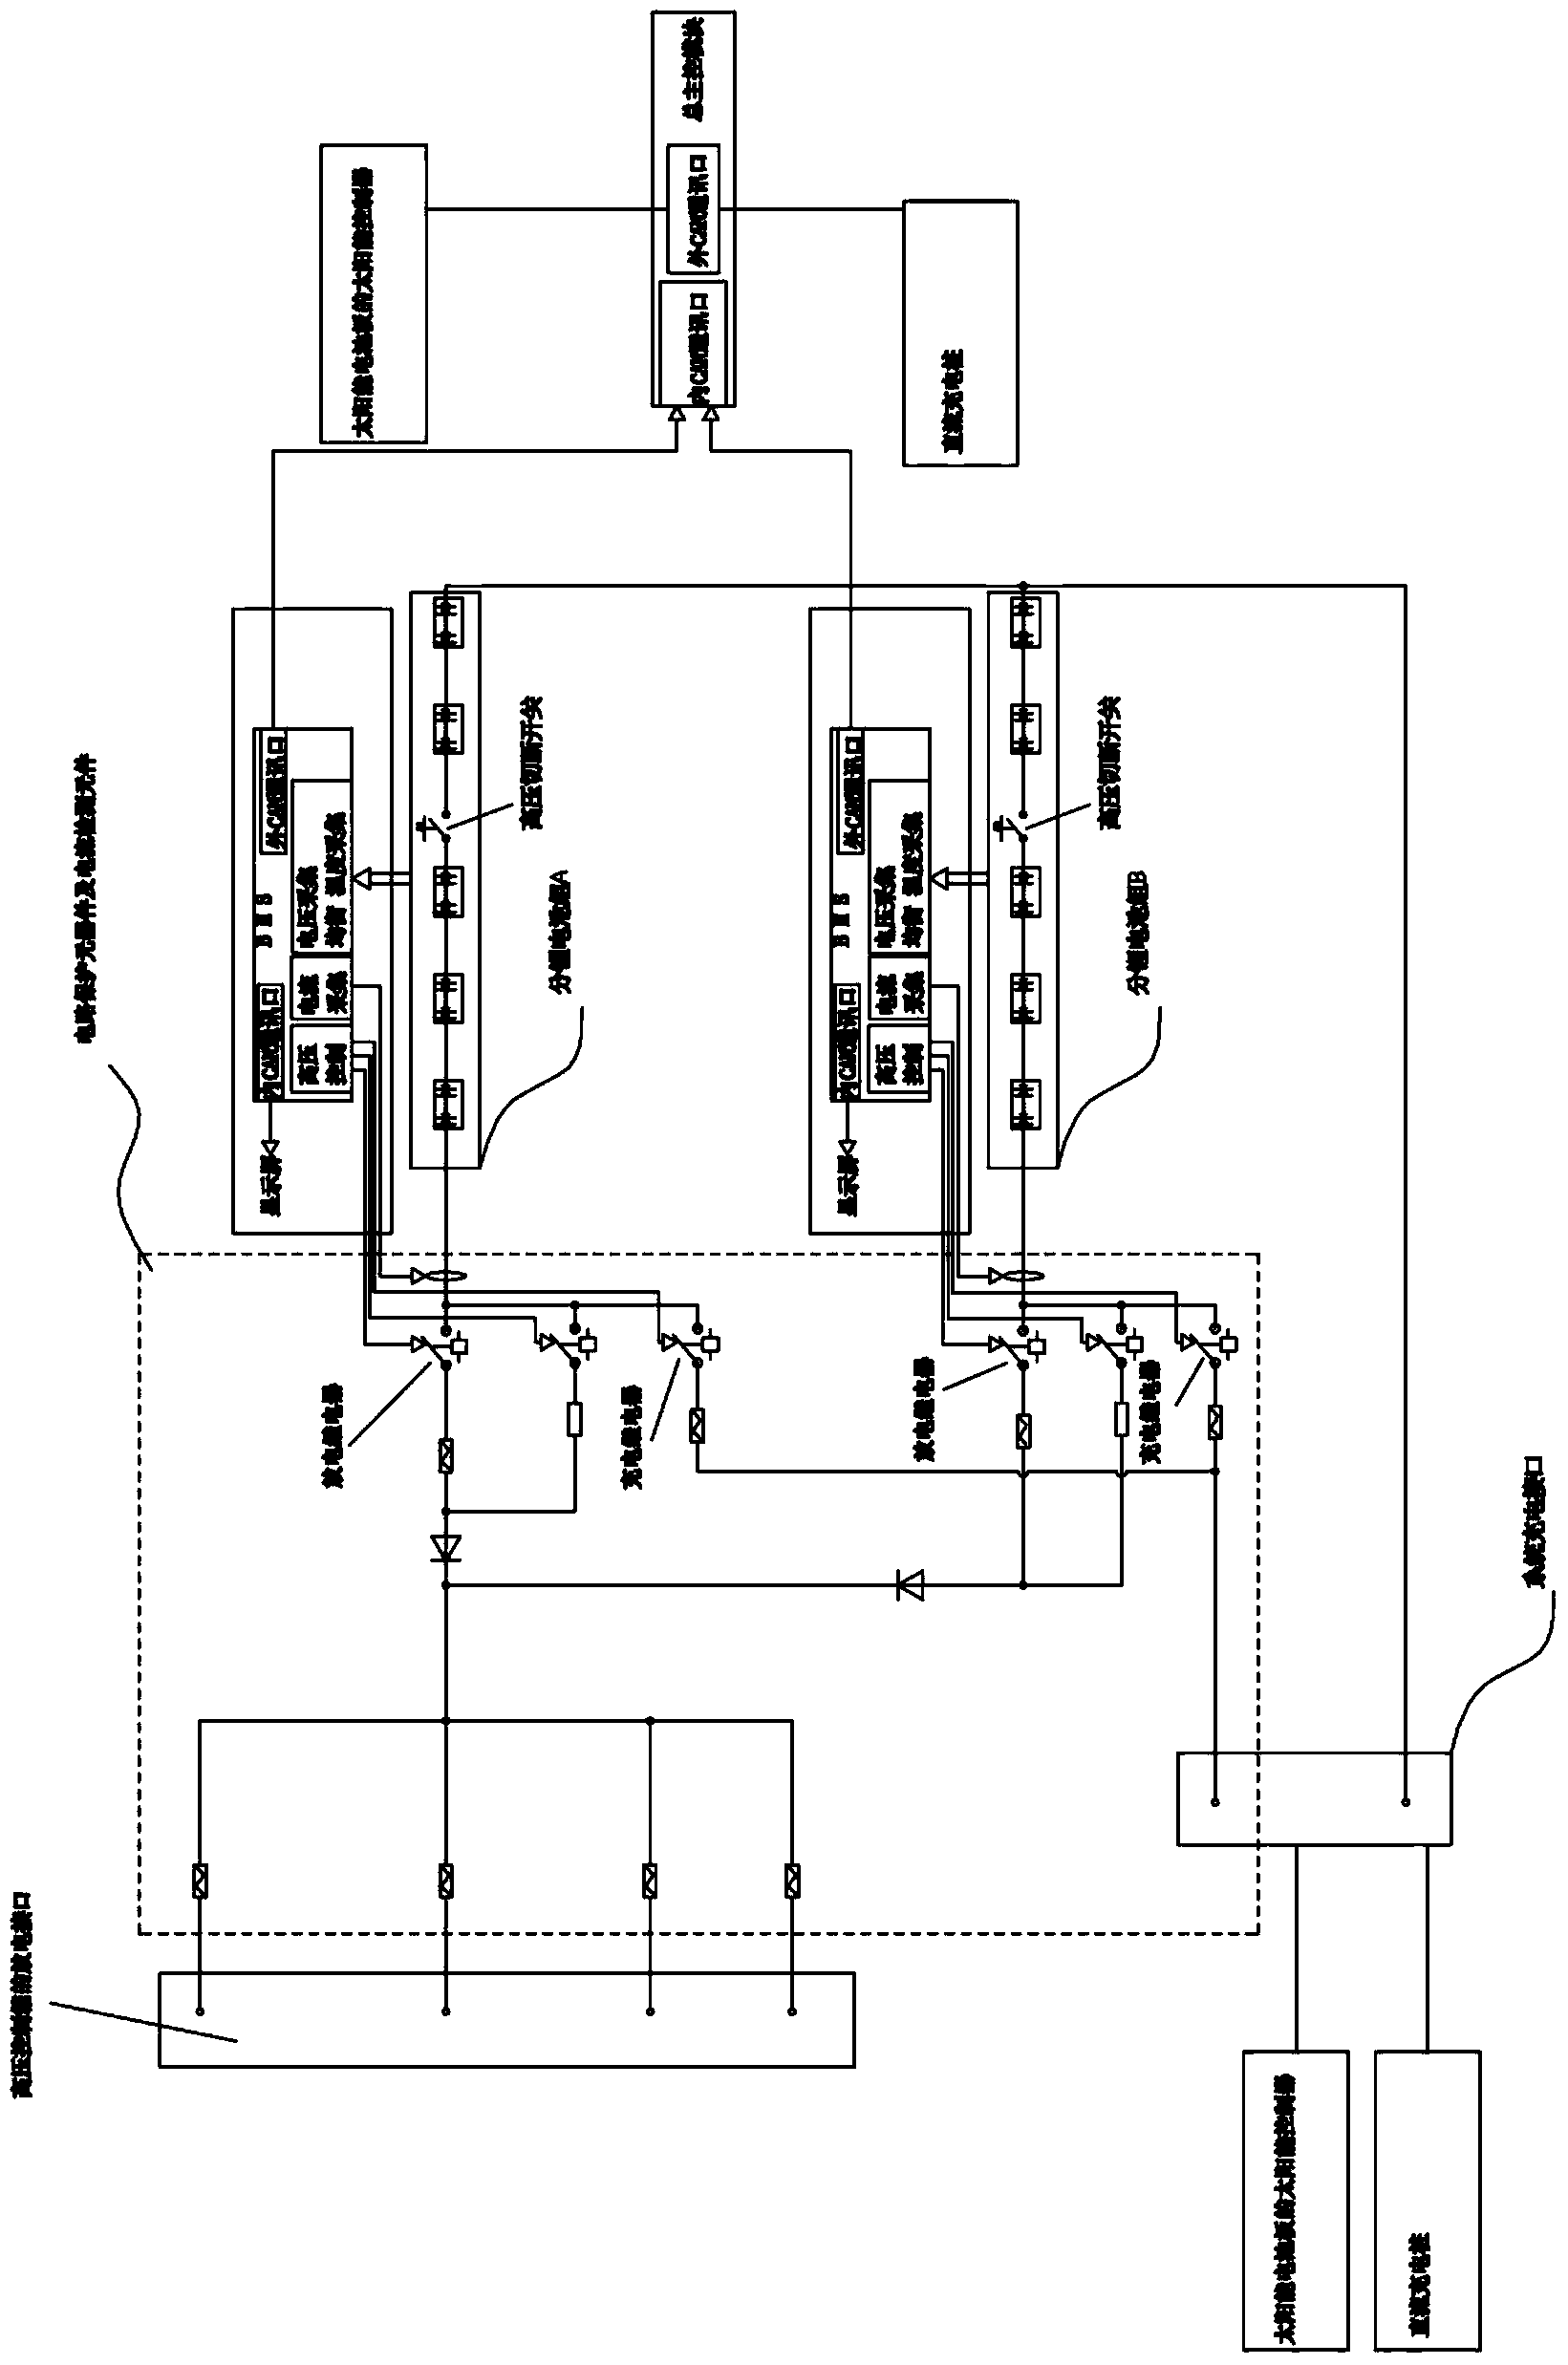 Blood collecting vehicle and power supply device and power supply mode of blood collecting vehicle-mounted equipment